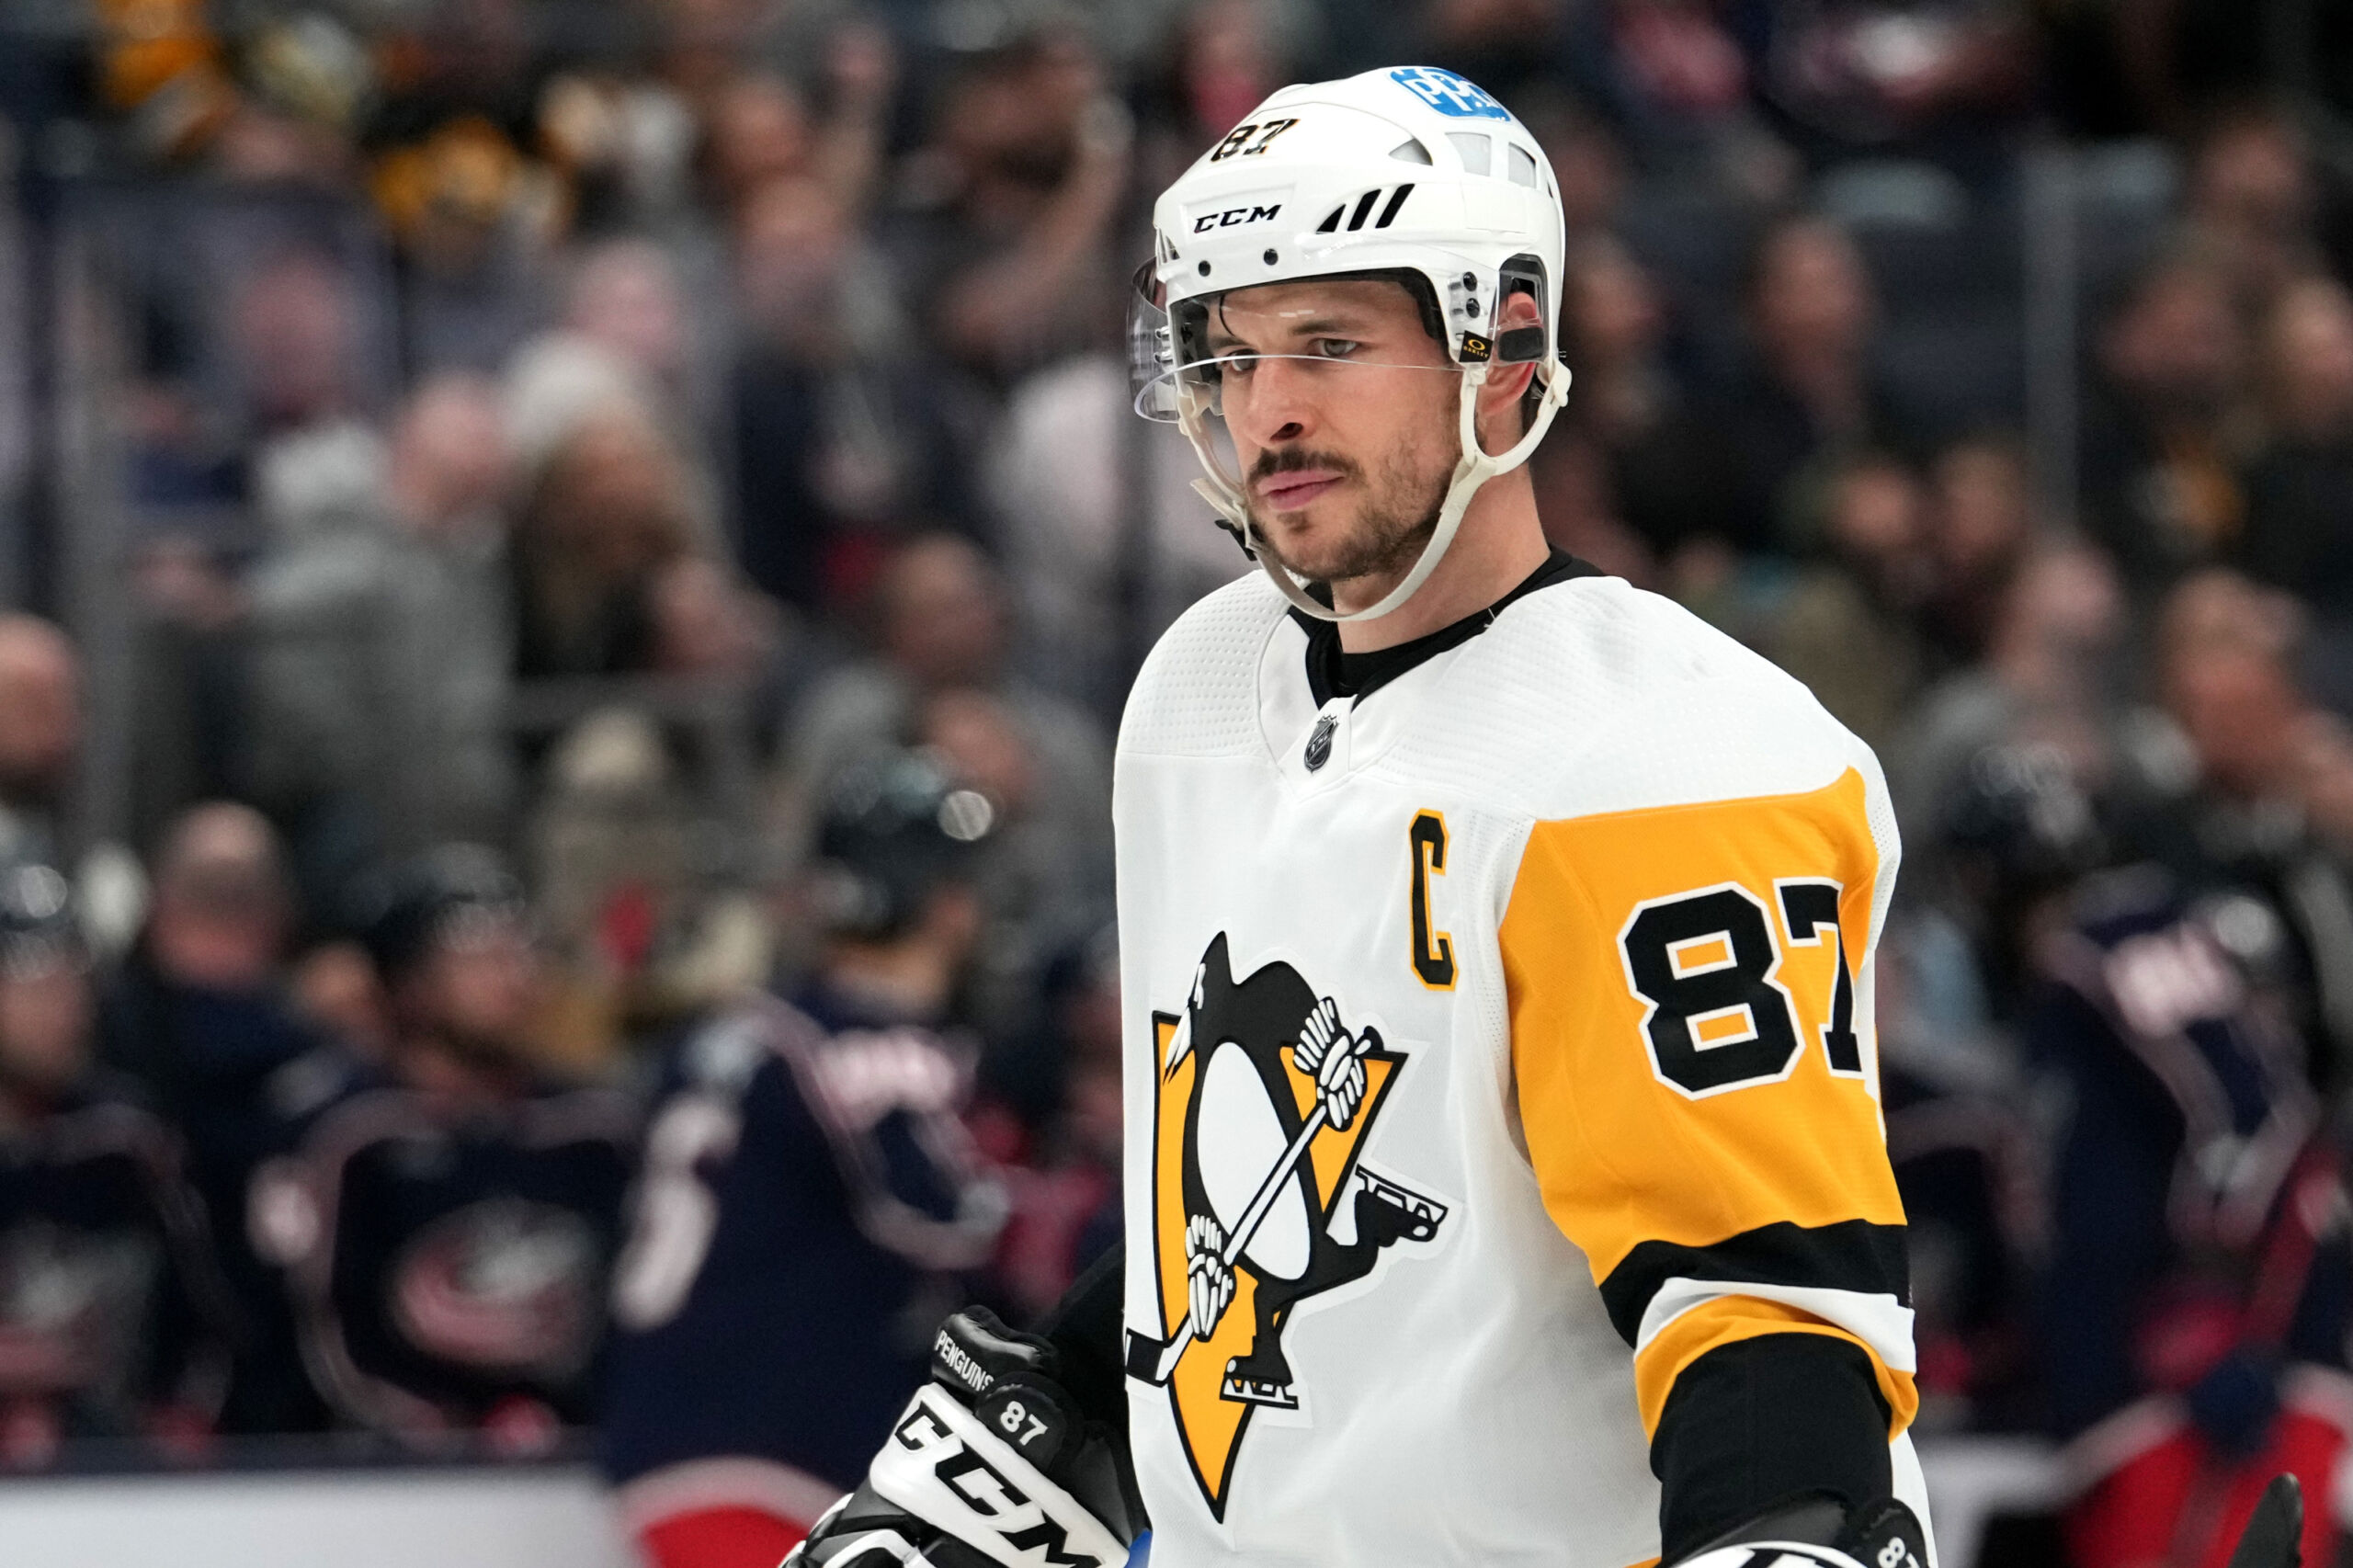 Take a look at some interesting Pittsburgh Penguins concept